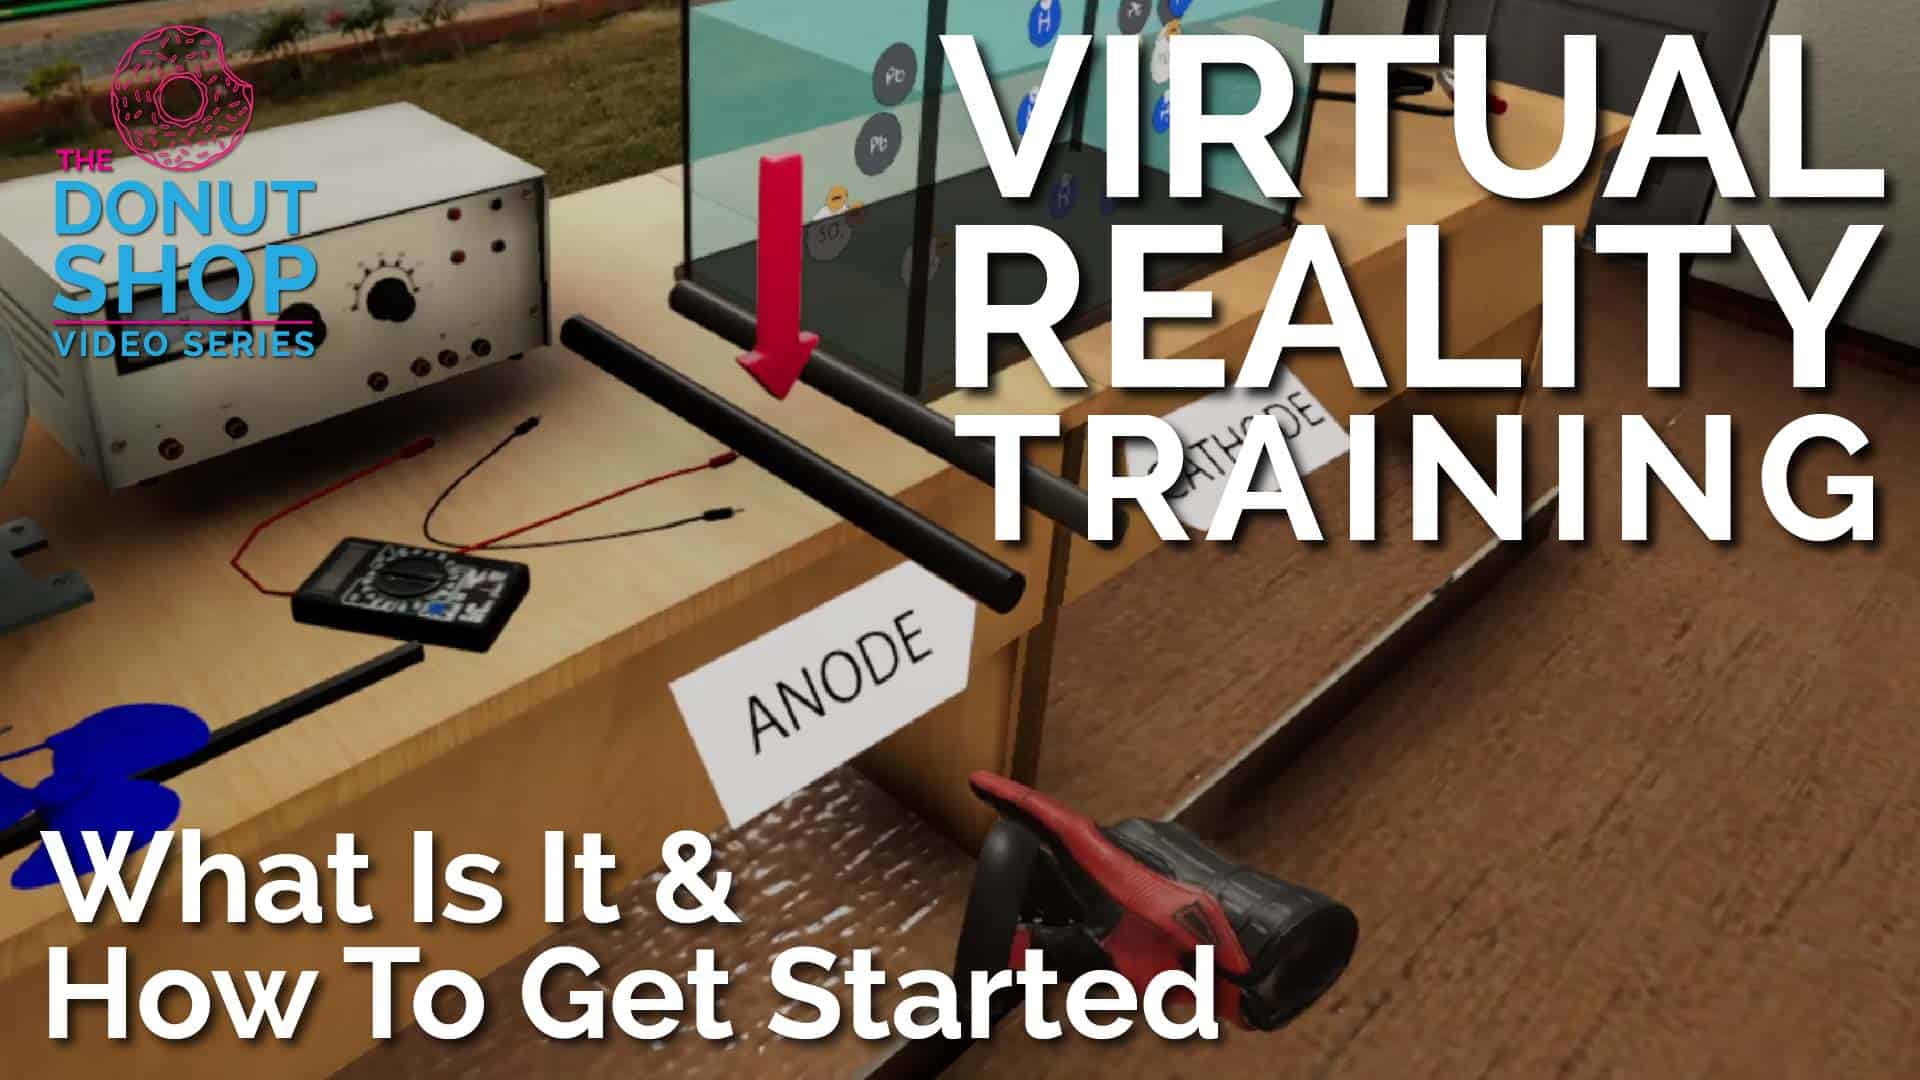 VR Training: What is it & How to Get Started